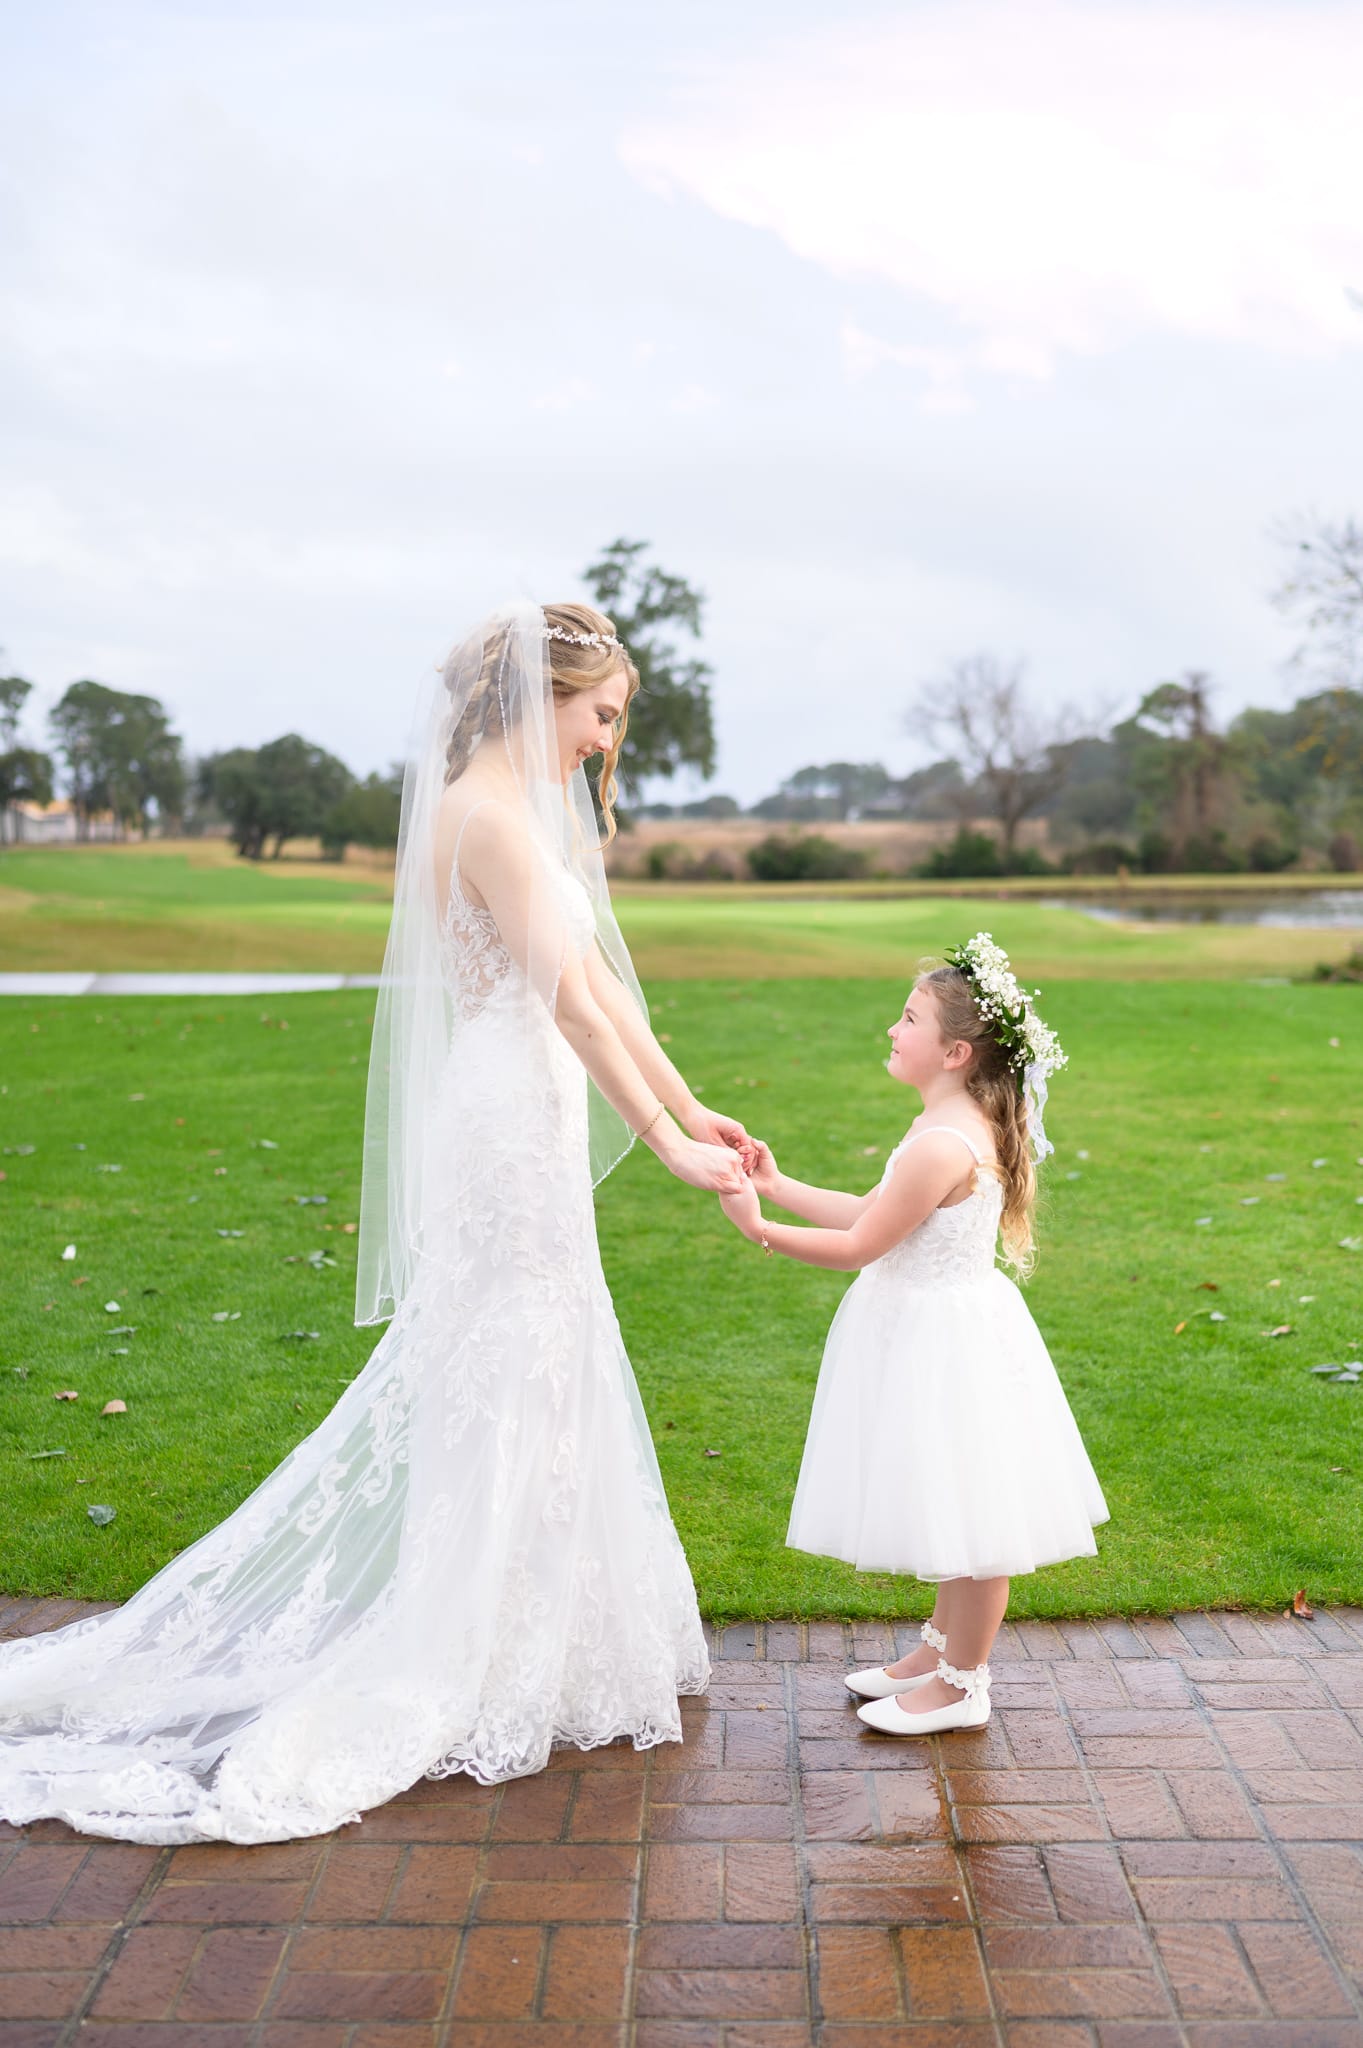 Recreating a picture from when the bride was little - Pawleys Plantation Golf & Country Club